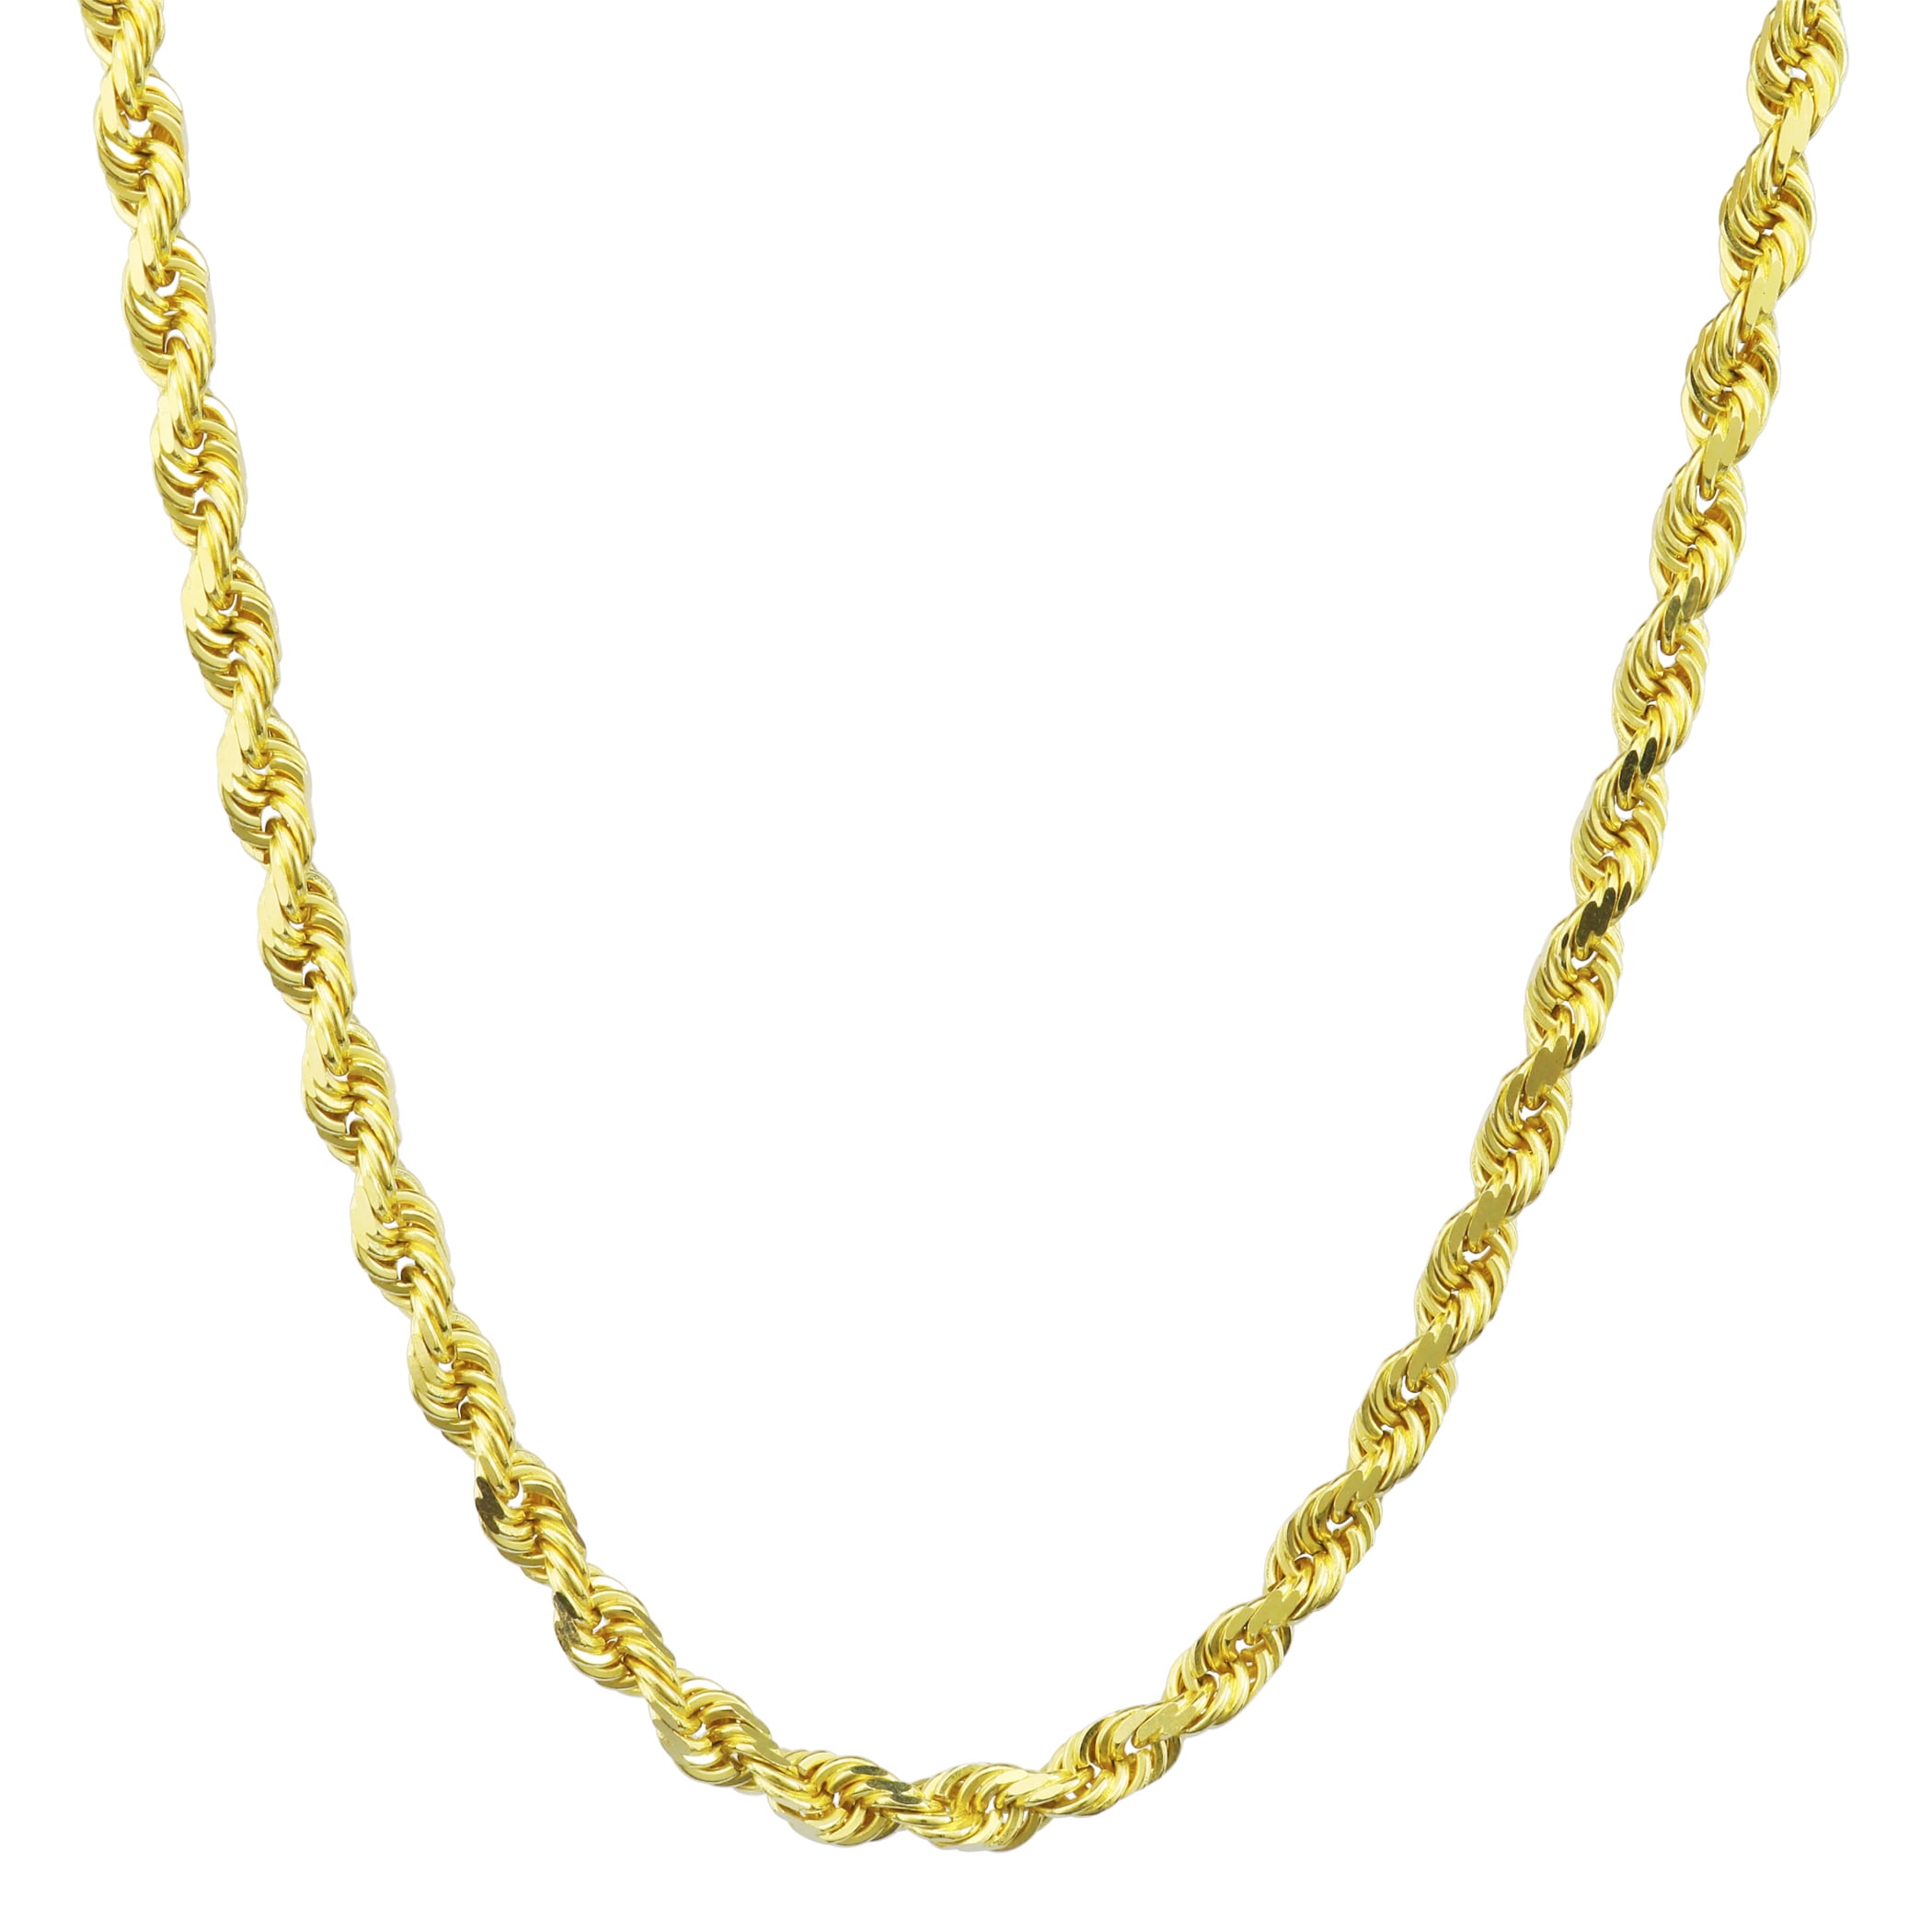 Nuragold - 14k Yellow Gold 5mm Hollow Rope Chain Pendant Necklace